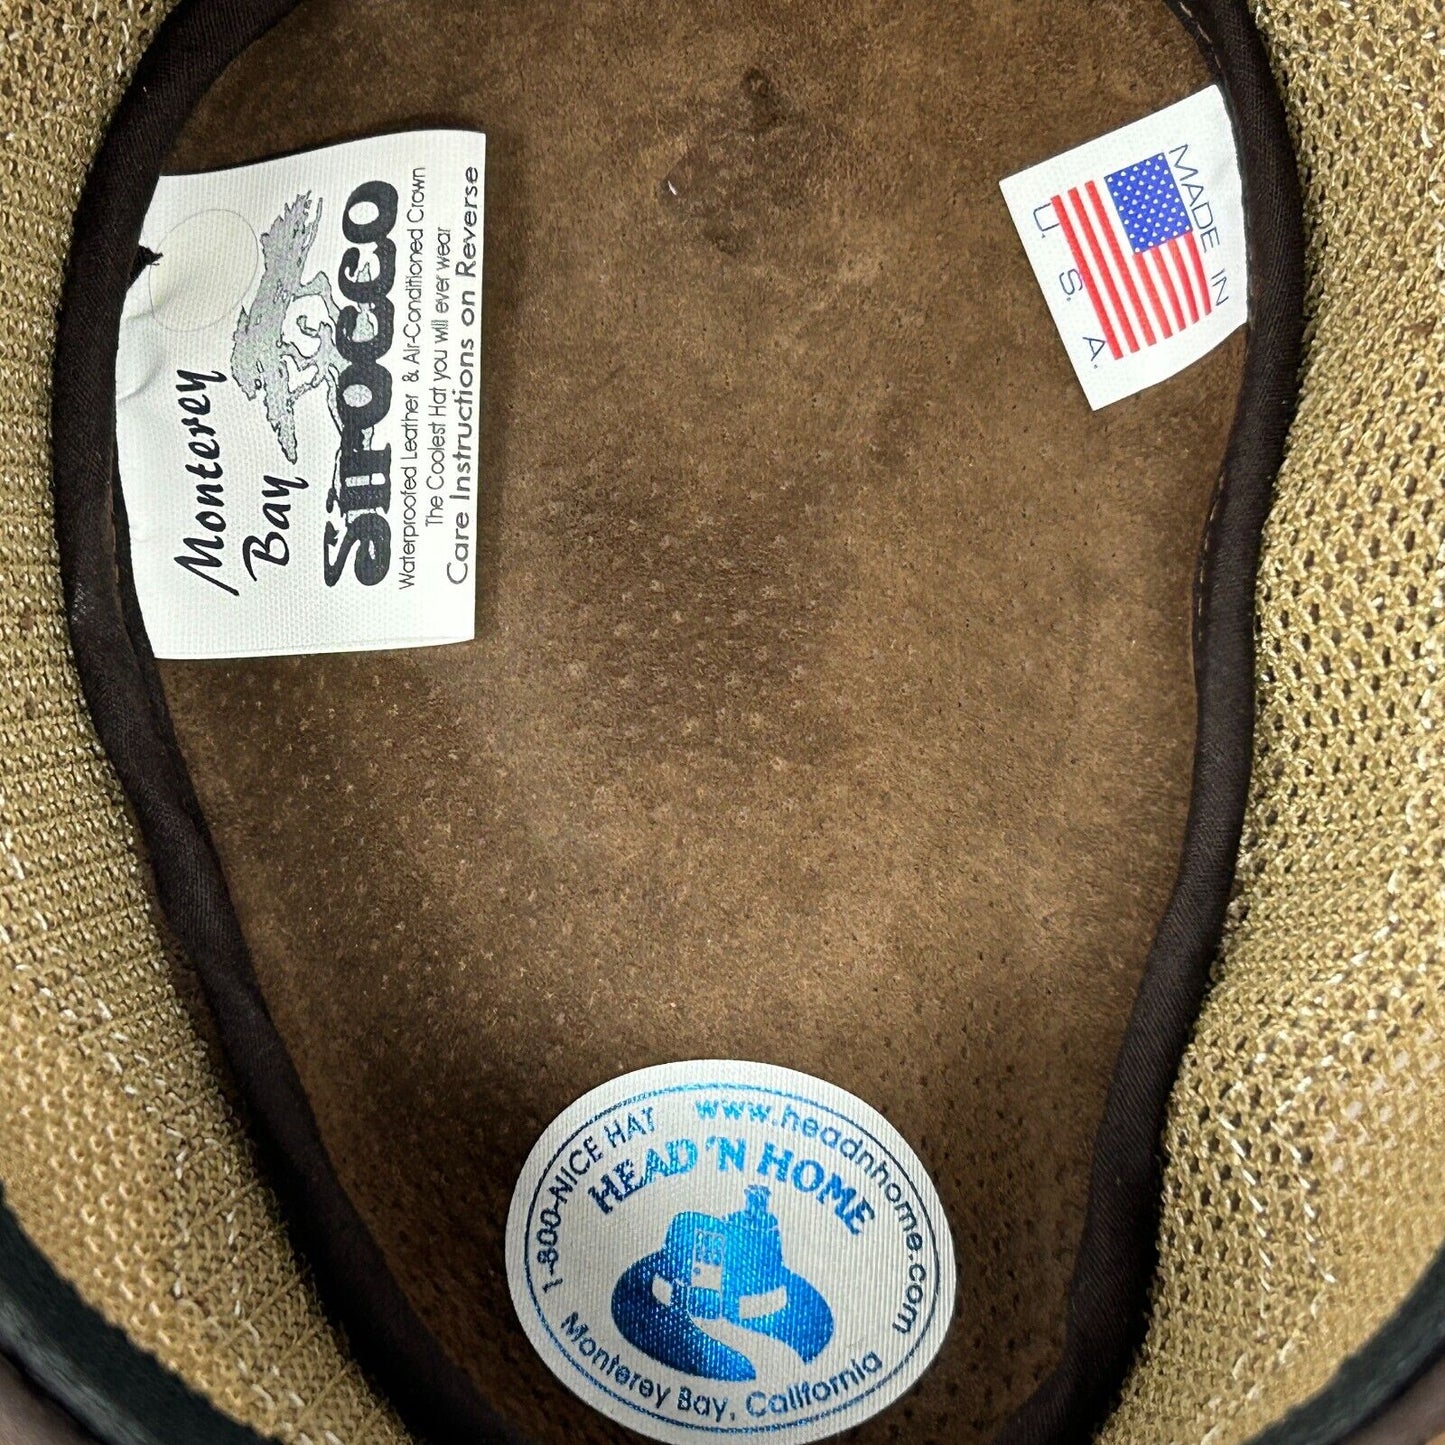 Sirocco Wide Brim Sun Hat Brown Leather Mesh American Hat Makers USA Made Medium